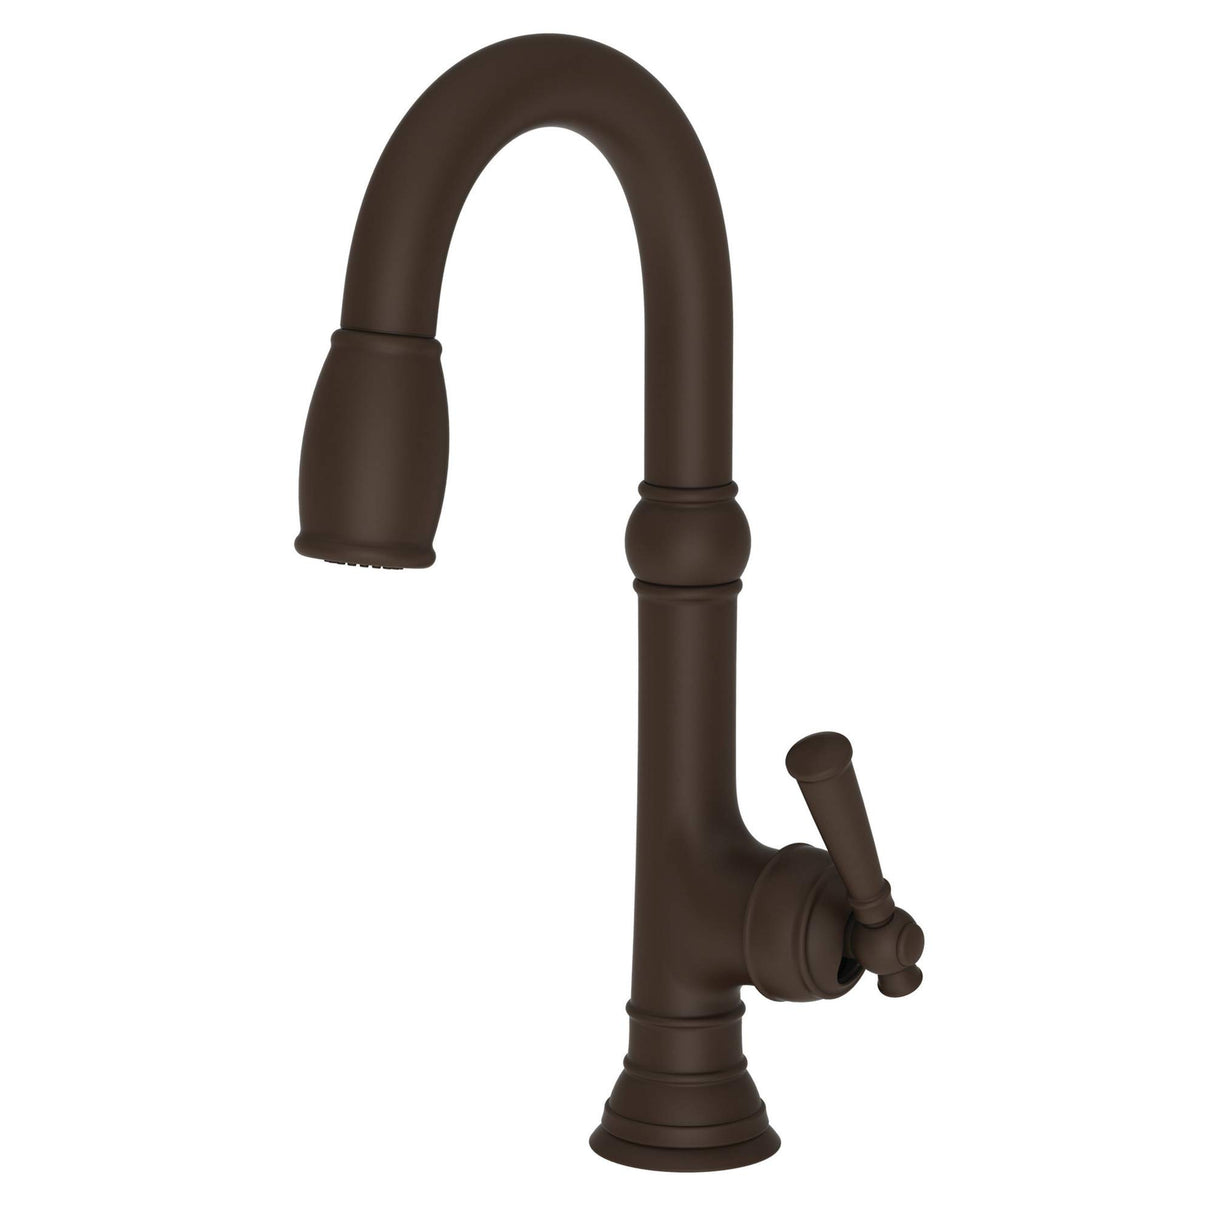 Newport Brass 2470-5223 Jacobean Prep Faucet with Metal Lever Handle, Oil Rubbed Bronze